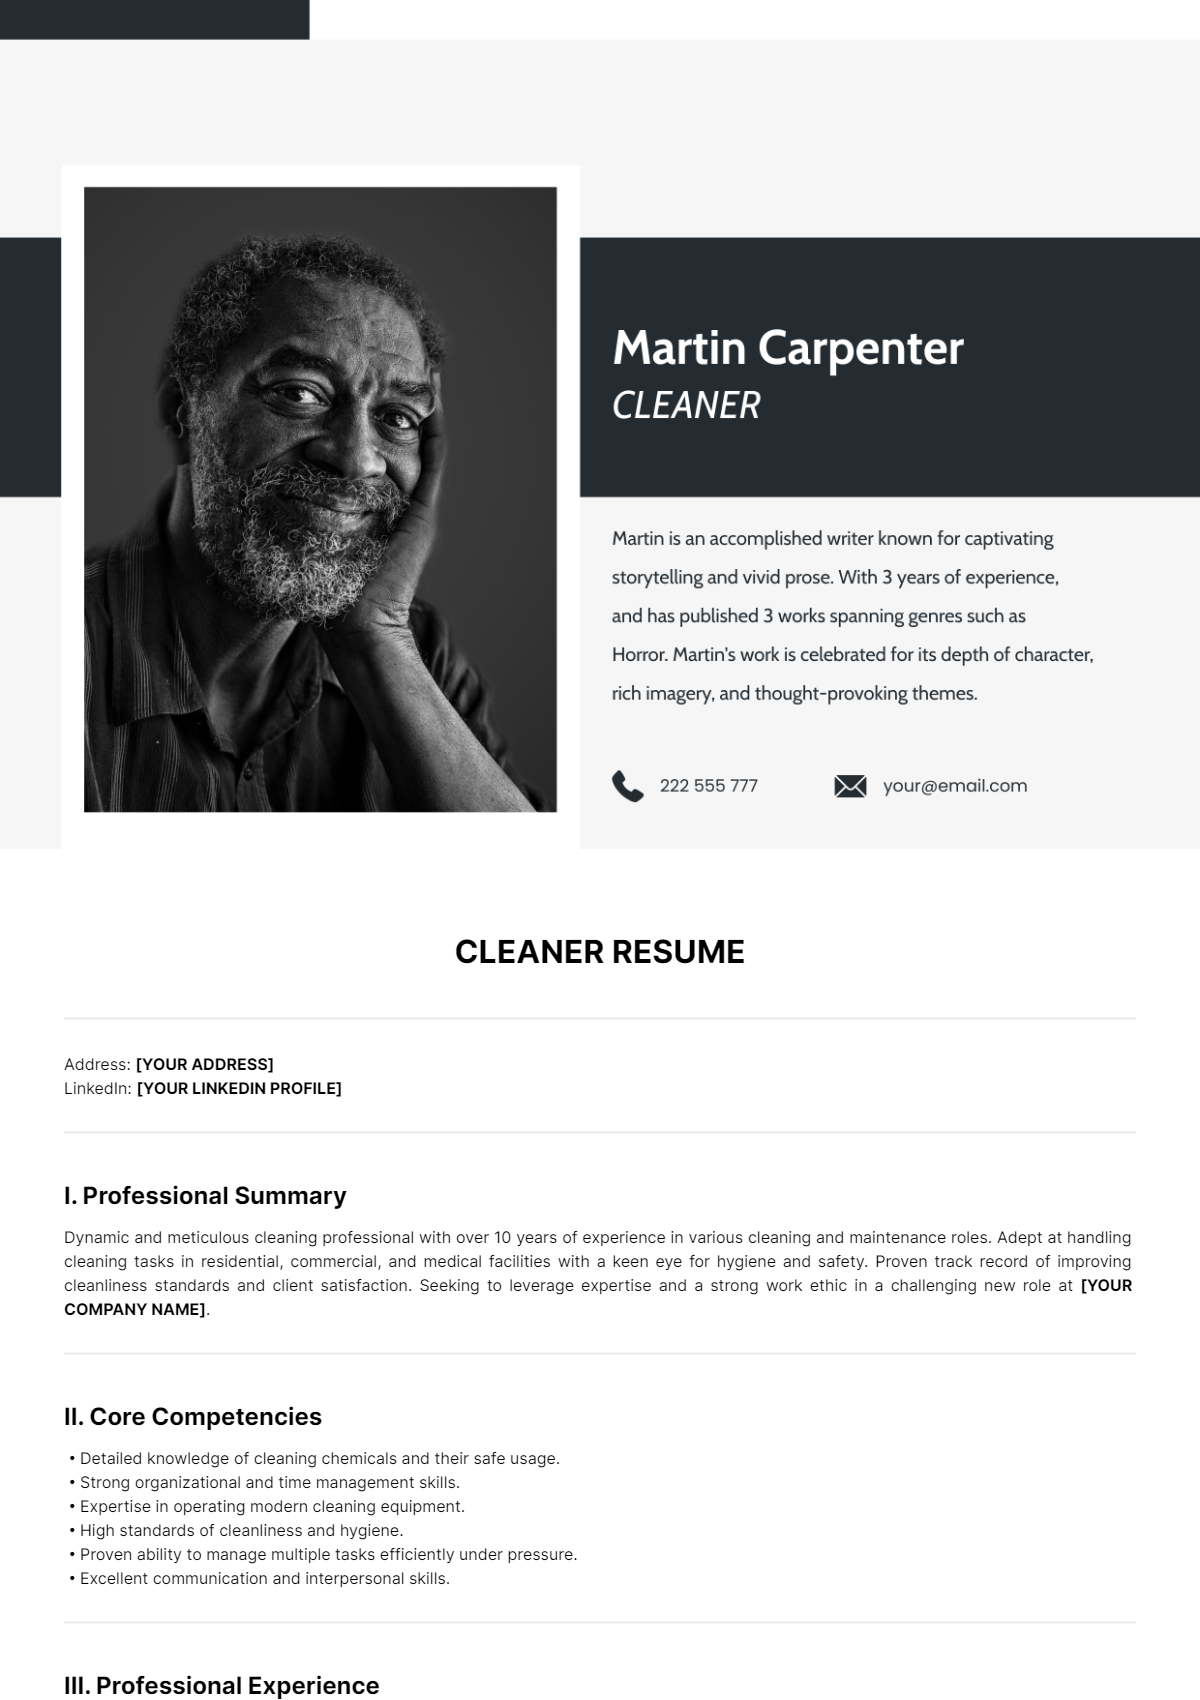 Cleaner Resume Template